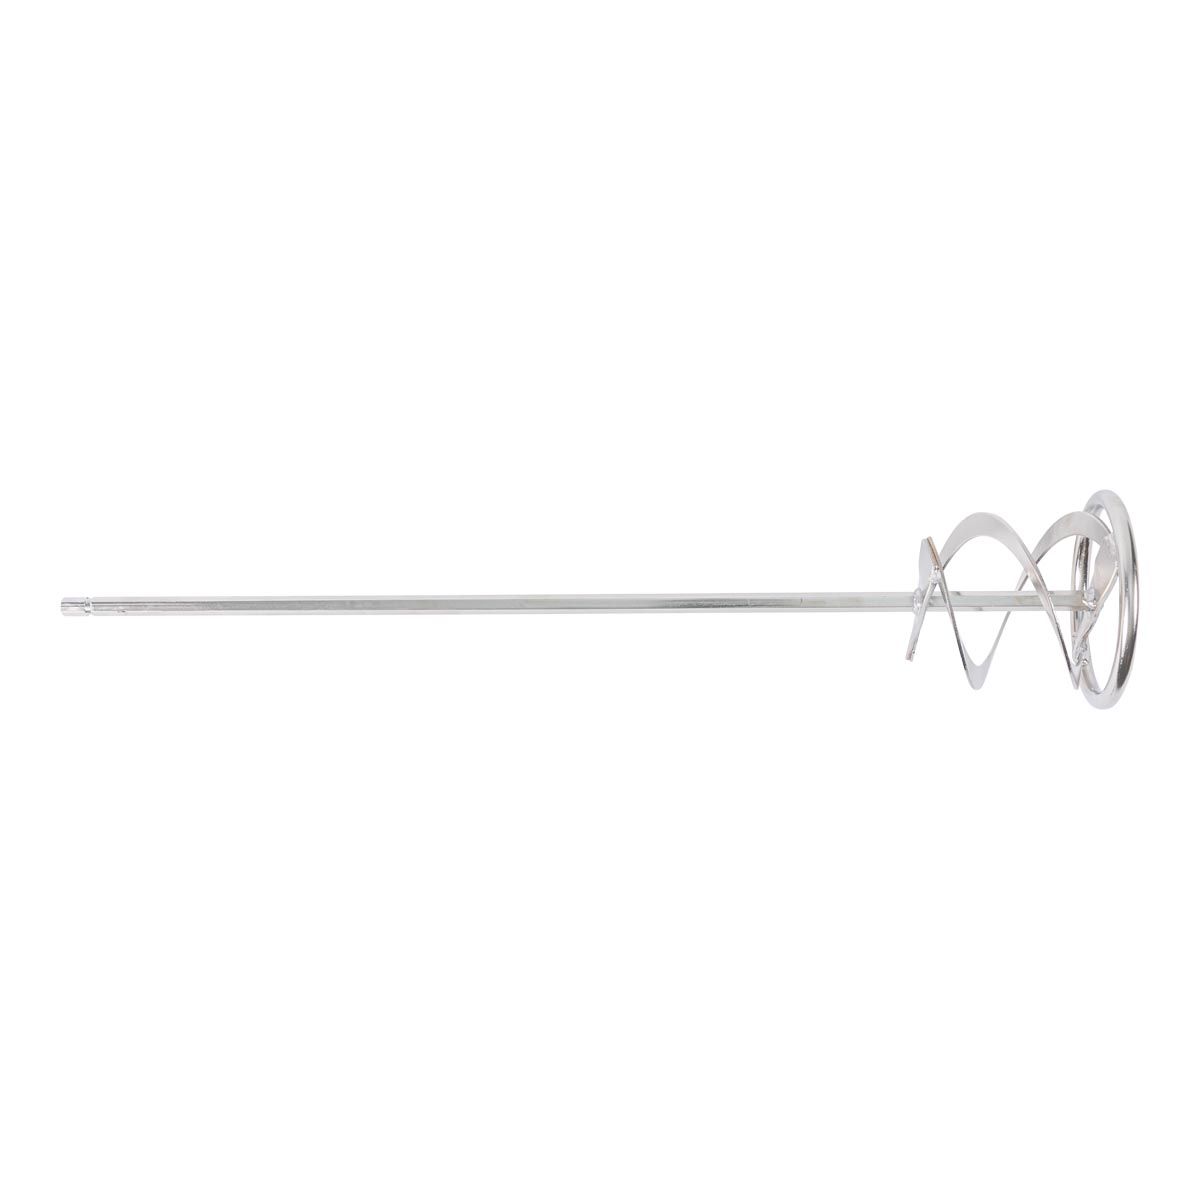 Helical W/RIM Mixing Paddle / Stirrer OX-P120612 by Ox